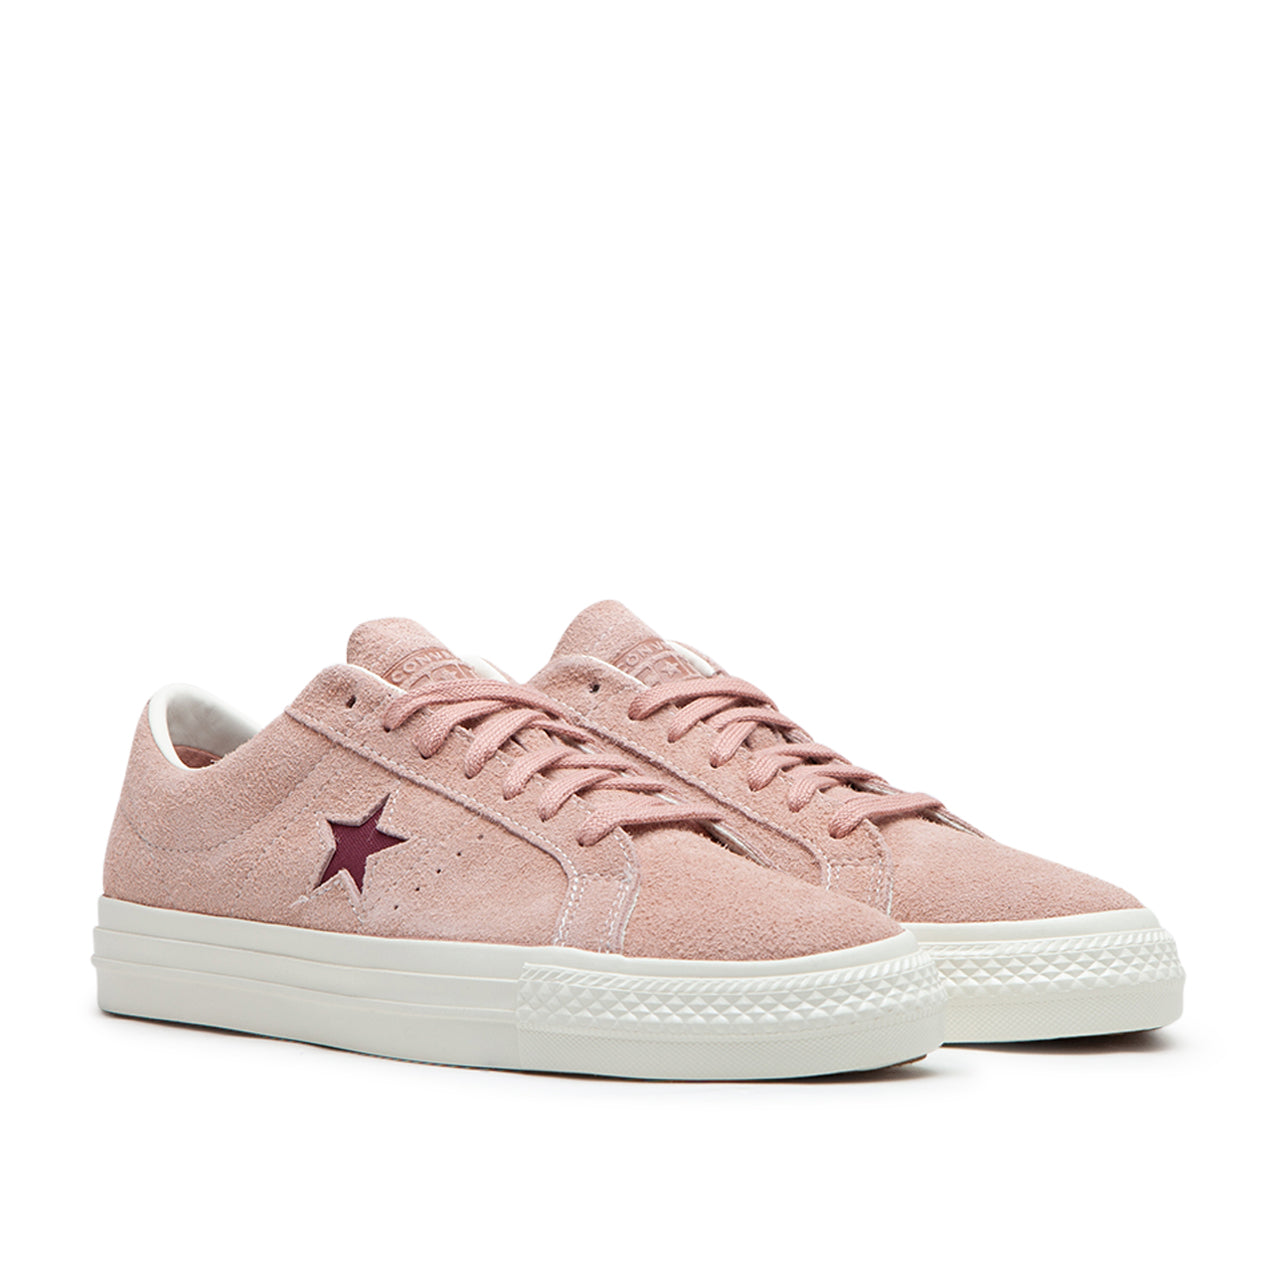 Converse One Star Pro Vintage Suede (Rosa / Weiß)  - Allike Store